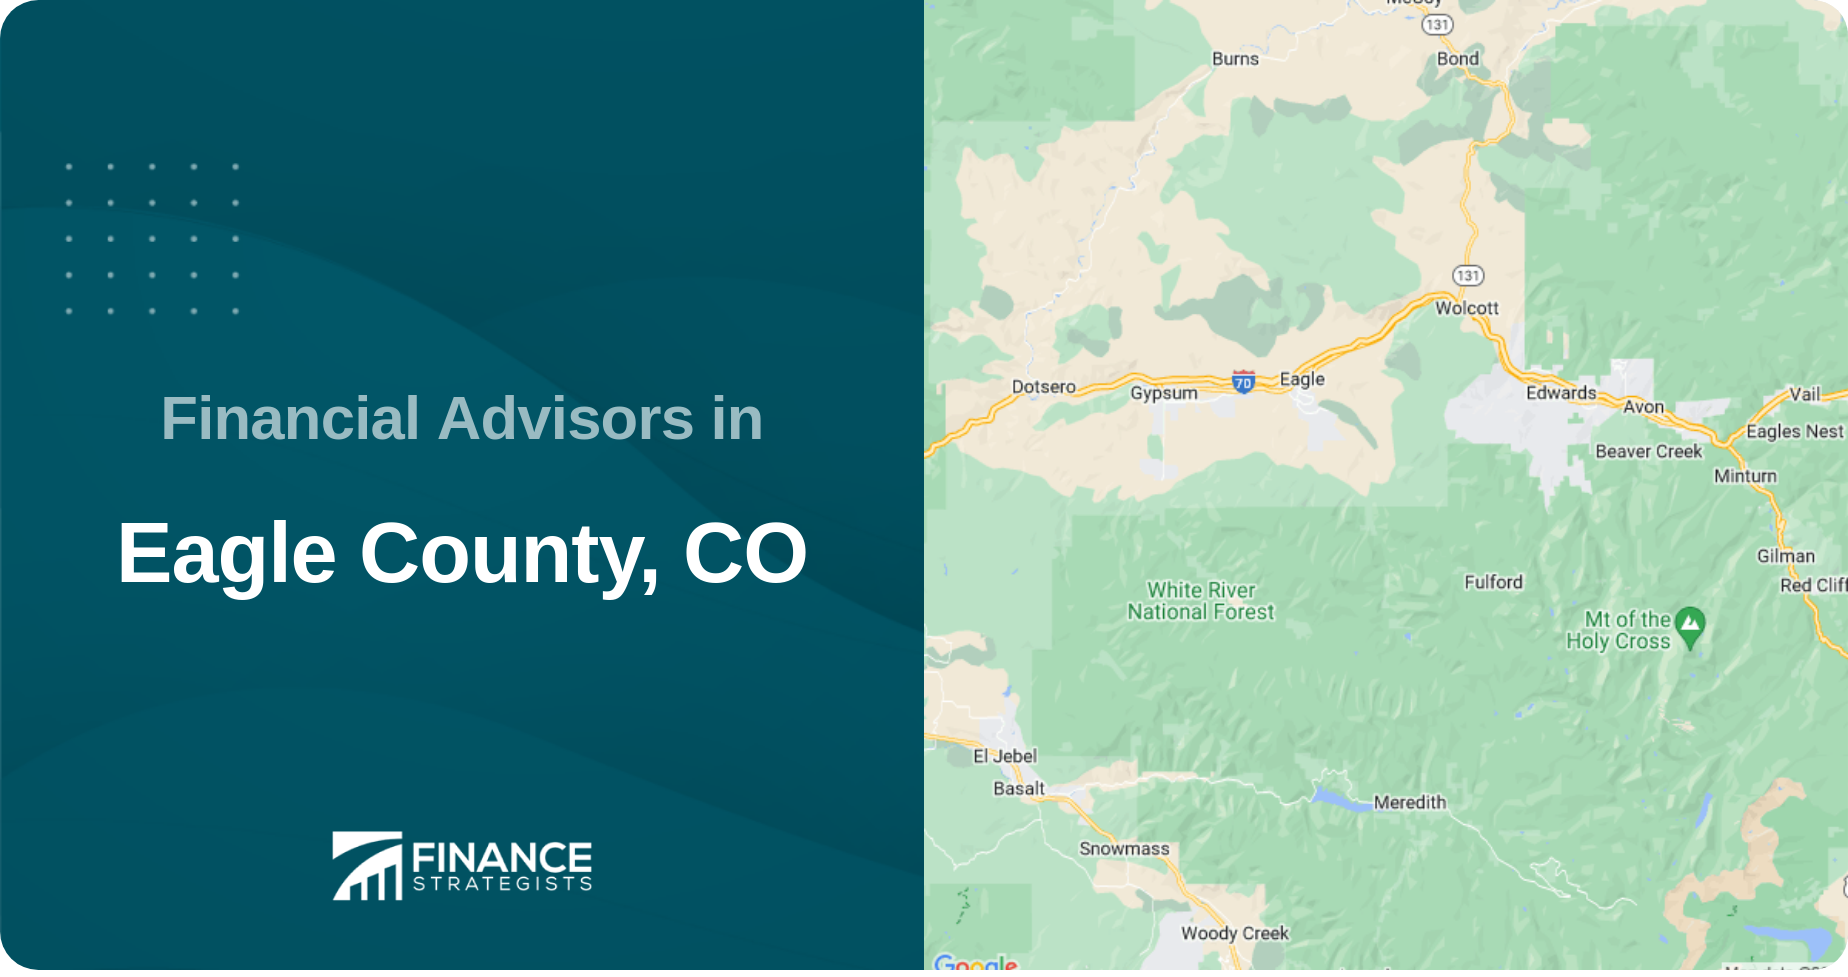 Financial Advisors in Eagle County, CO